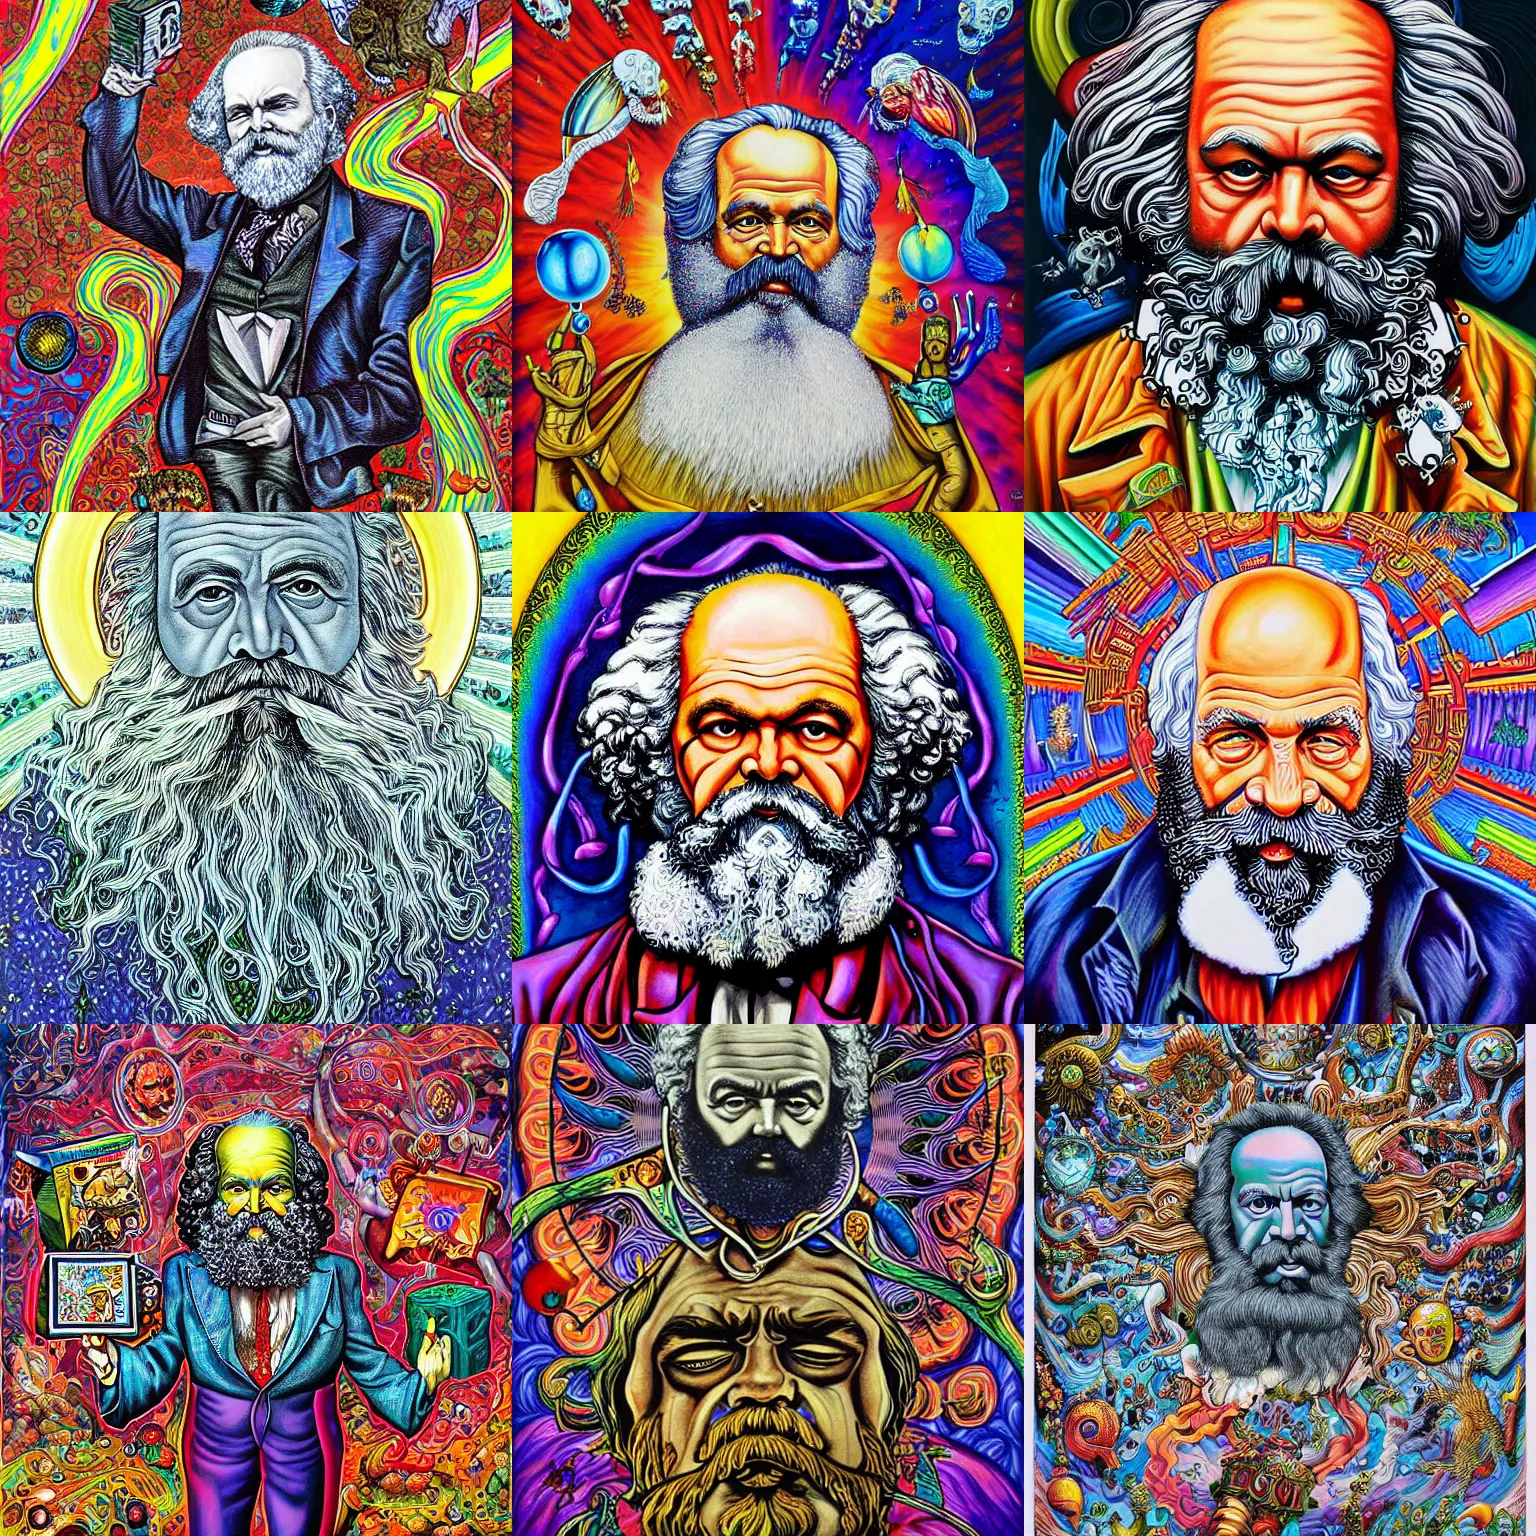 Prompt: Karl marx painting by aaron brooks, chris dyer, android jones, and alex grey, highly detailed, high quality, high definition